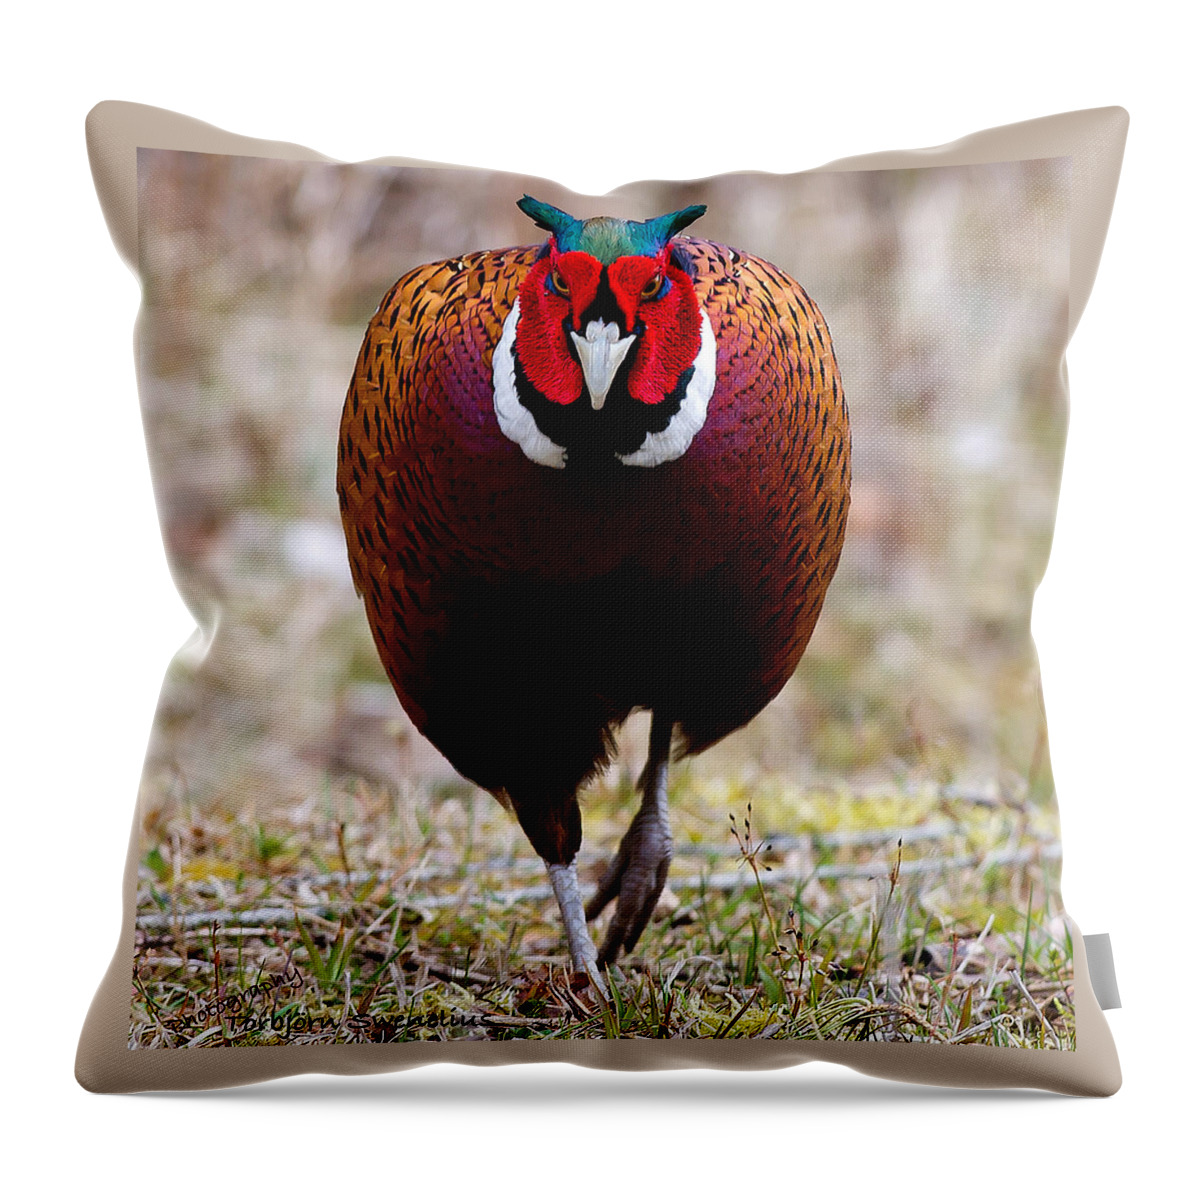 I'm Coming To Get You! Throw Pillow featuring the photograph I'm coming to get you by Torbjorn Swenelius